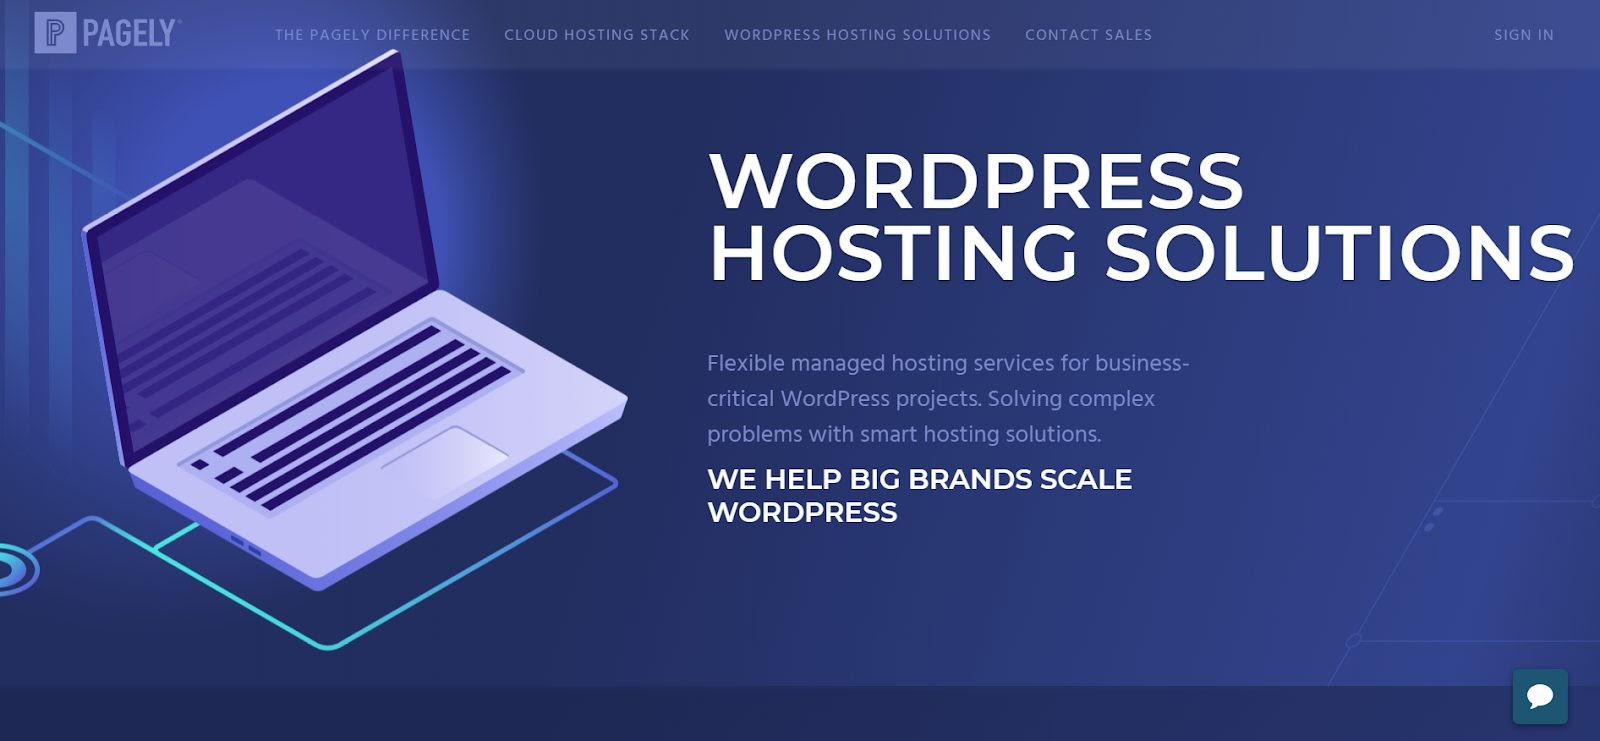 Pagely-WordPress-hosting-solutions-page